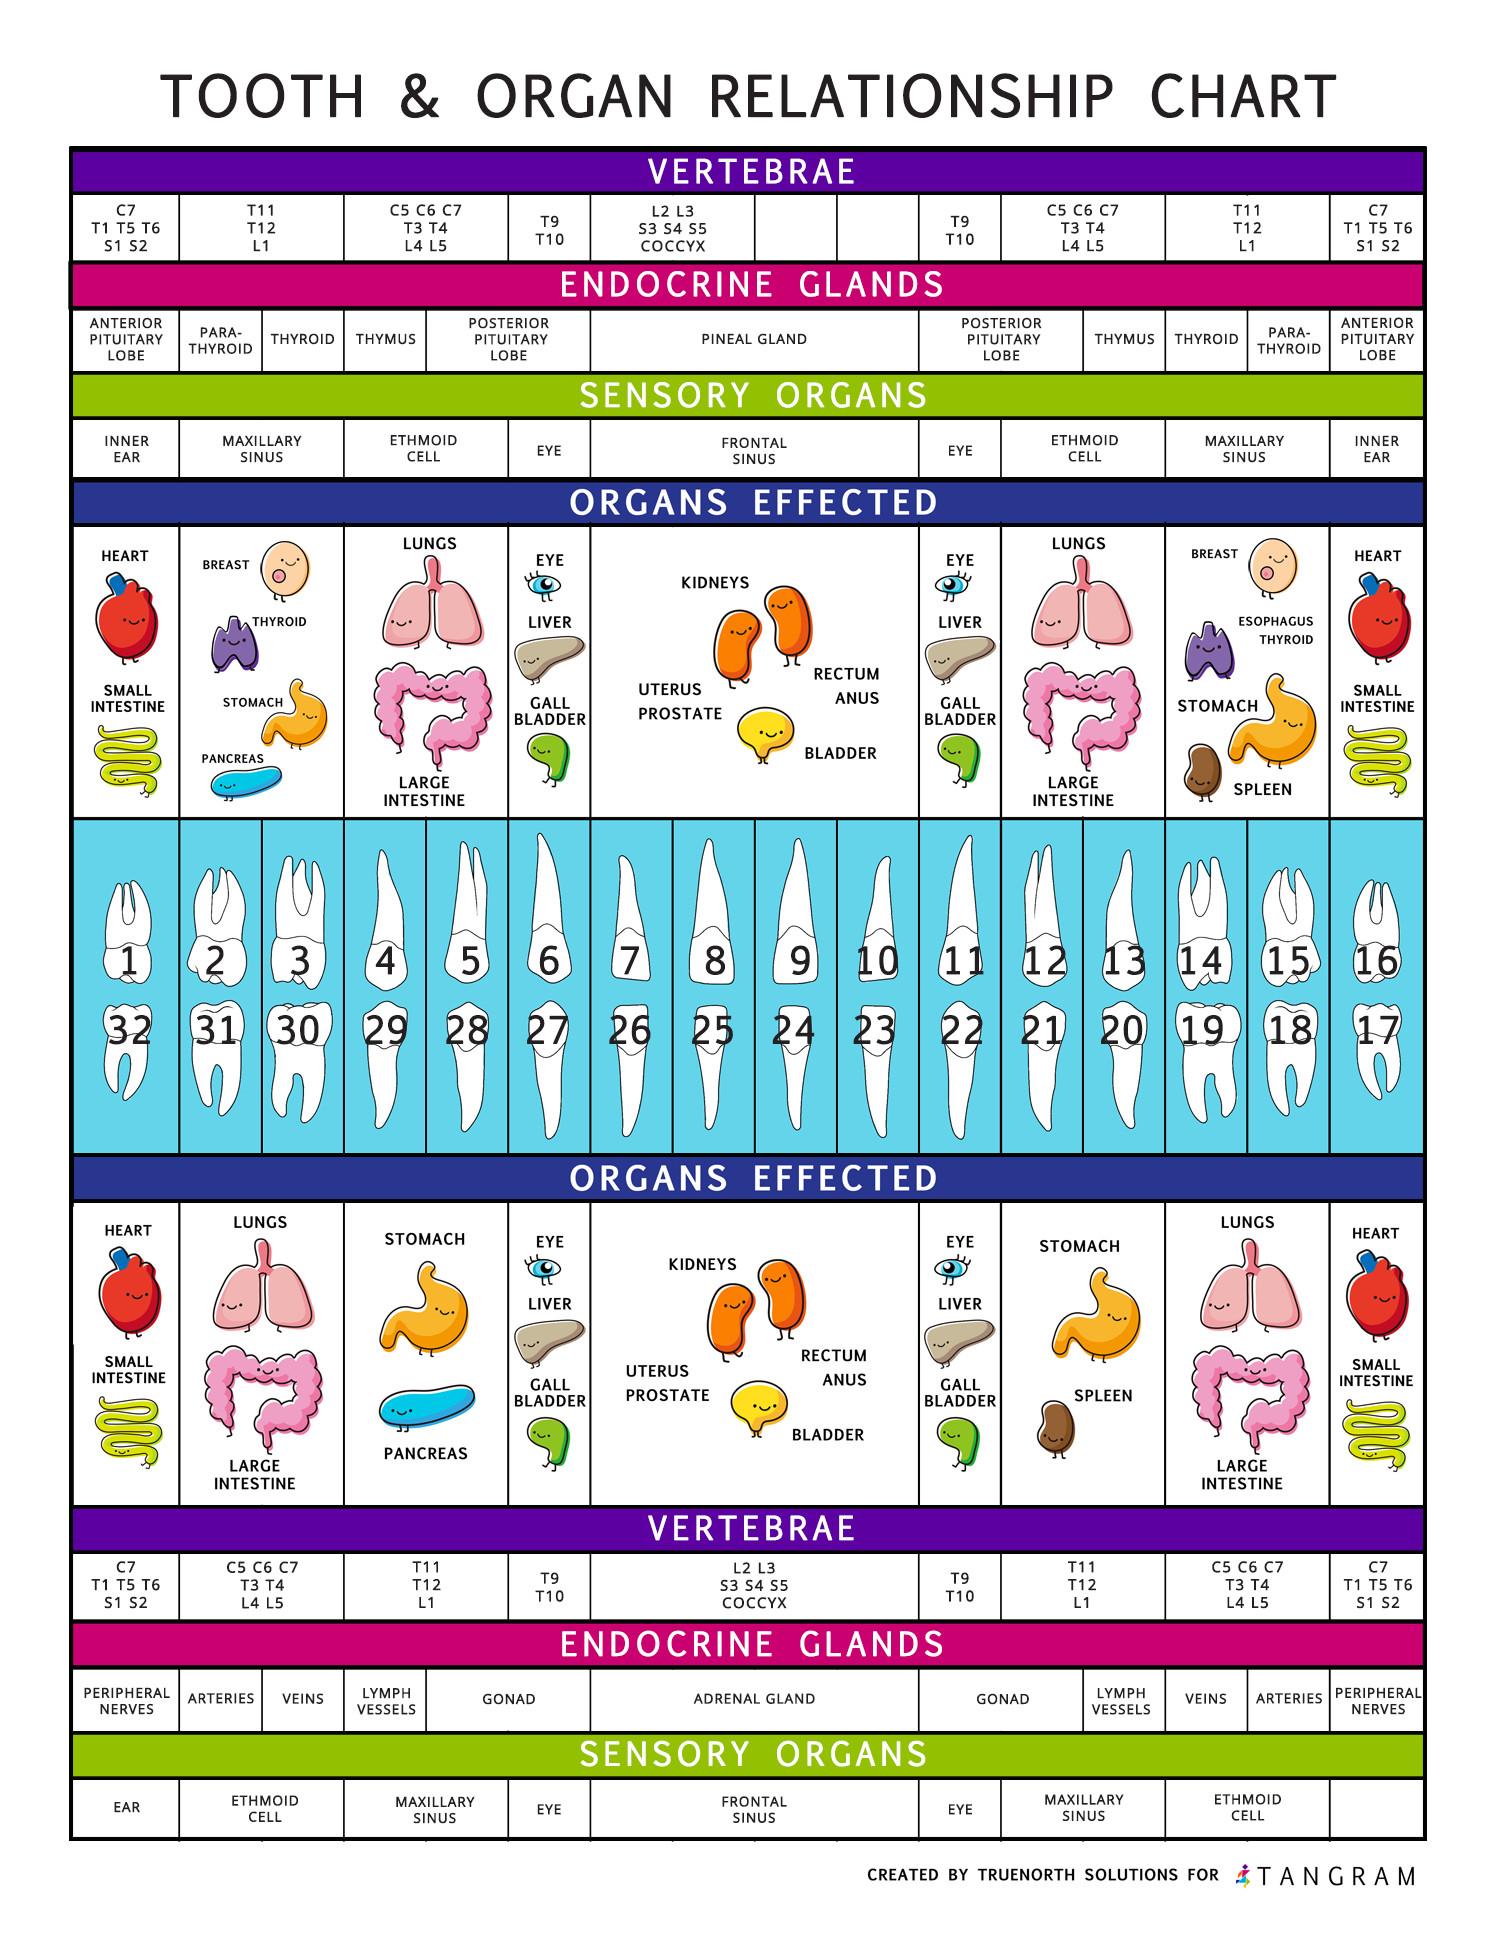 The Tooth & Body Relationship Chart